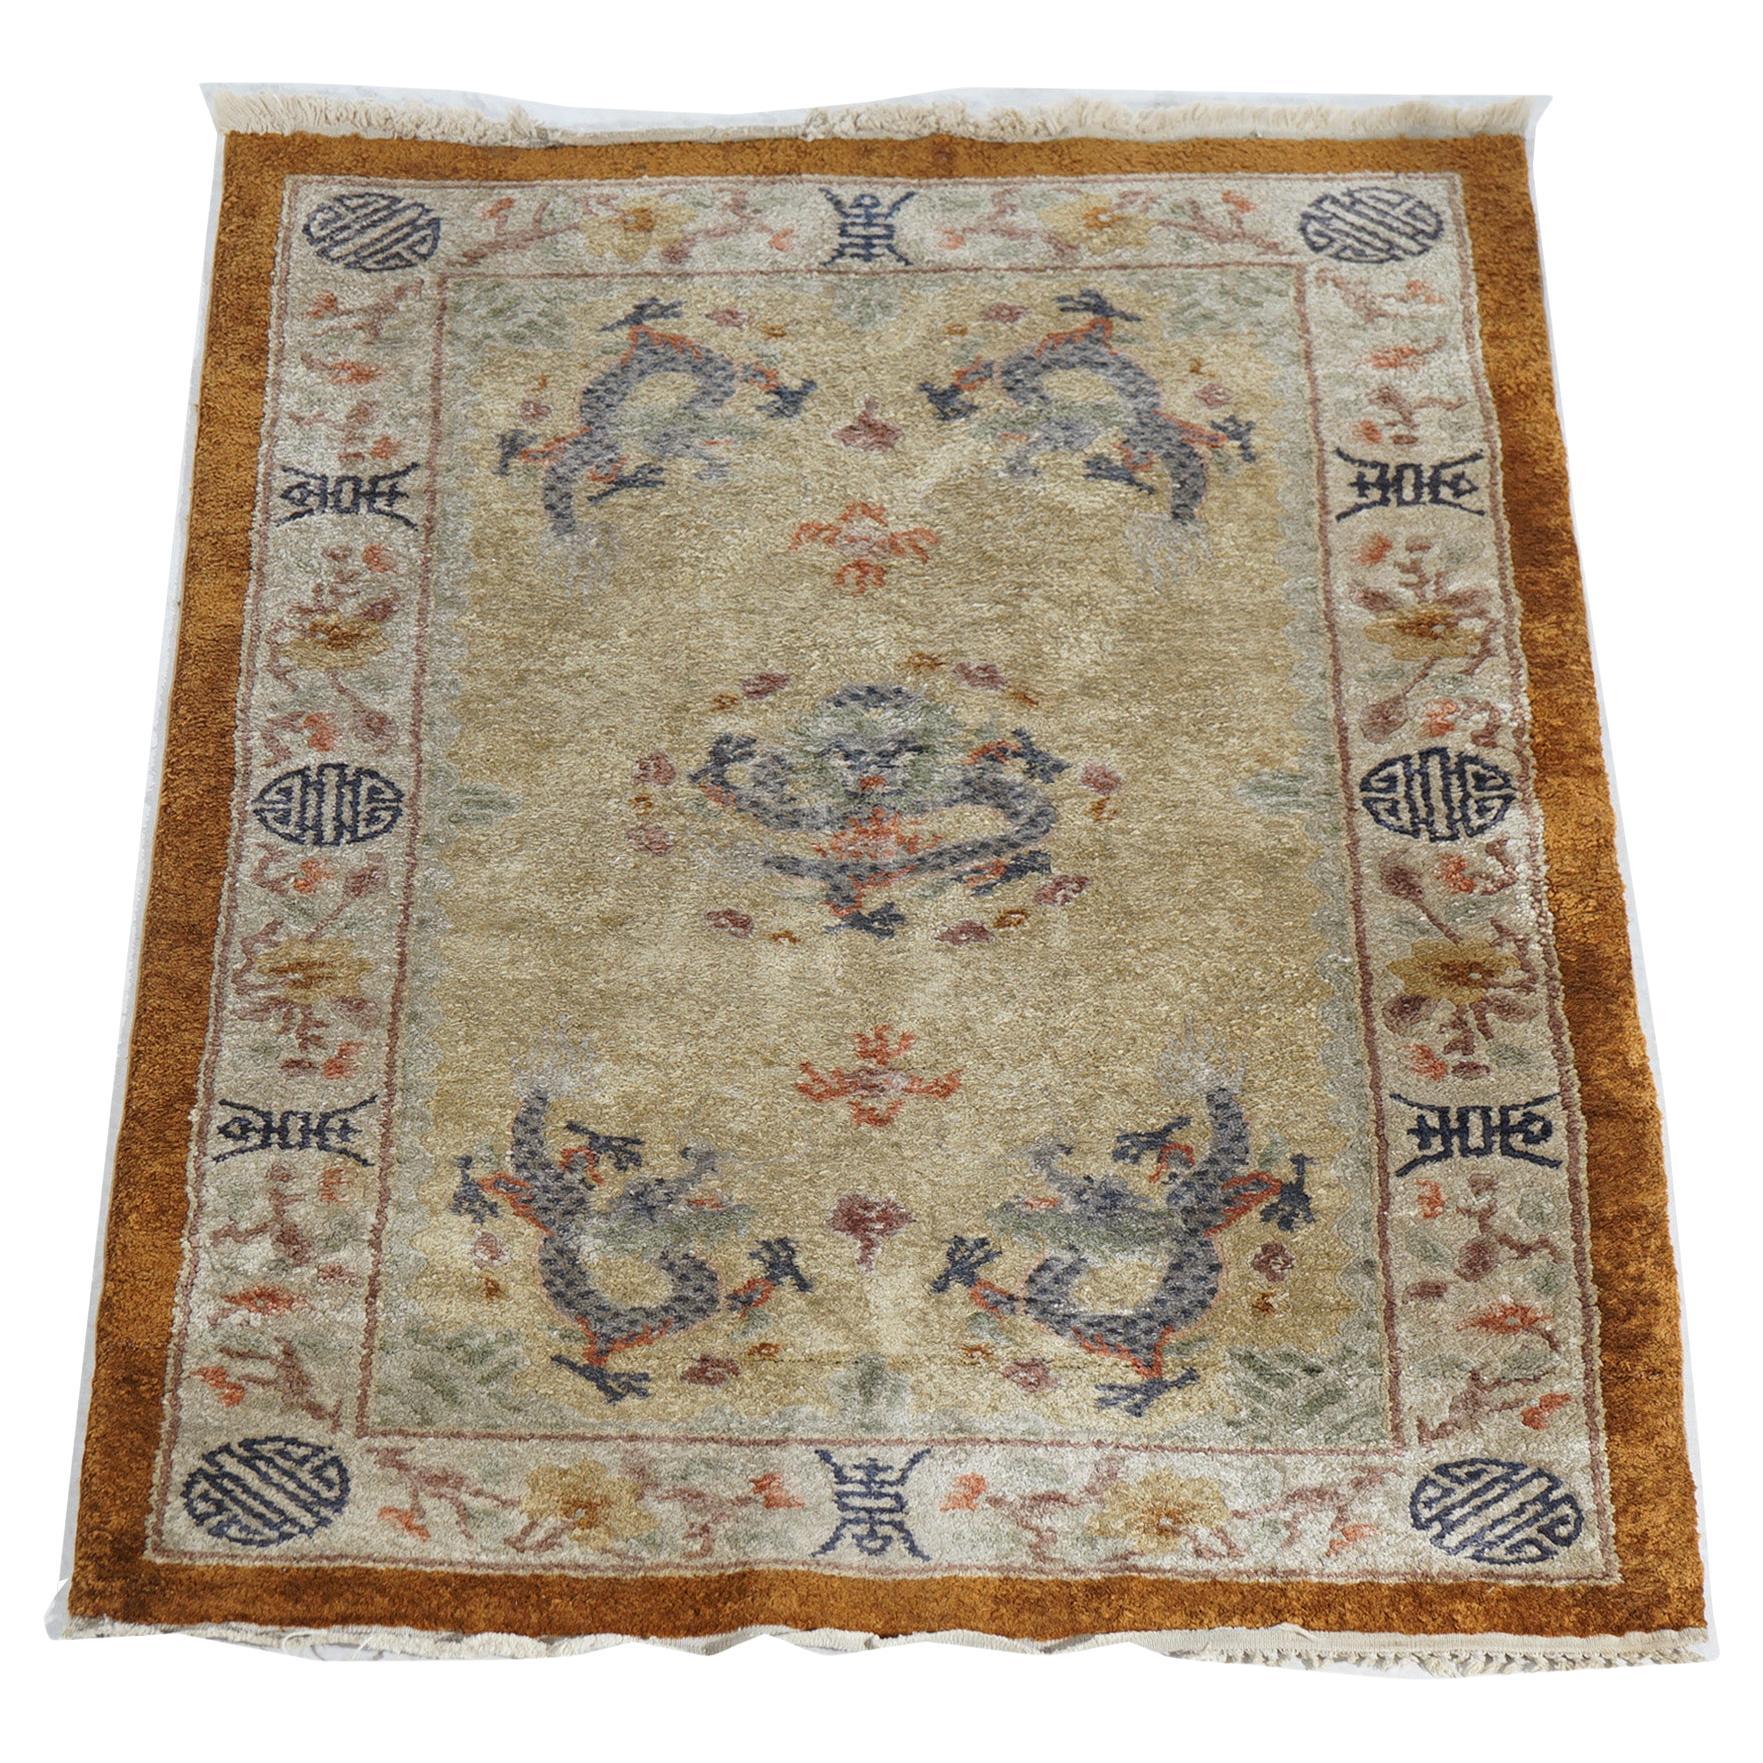 Antique Silk Chinese Oriental Rug with Dragons & Symbols Circa 1920 For Sale